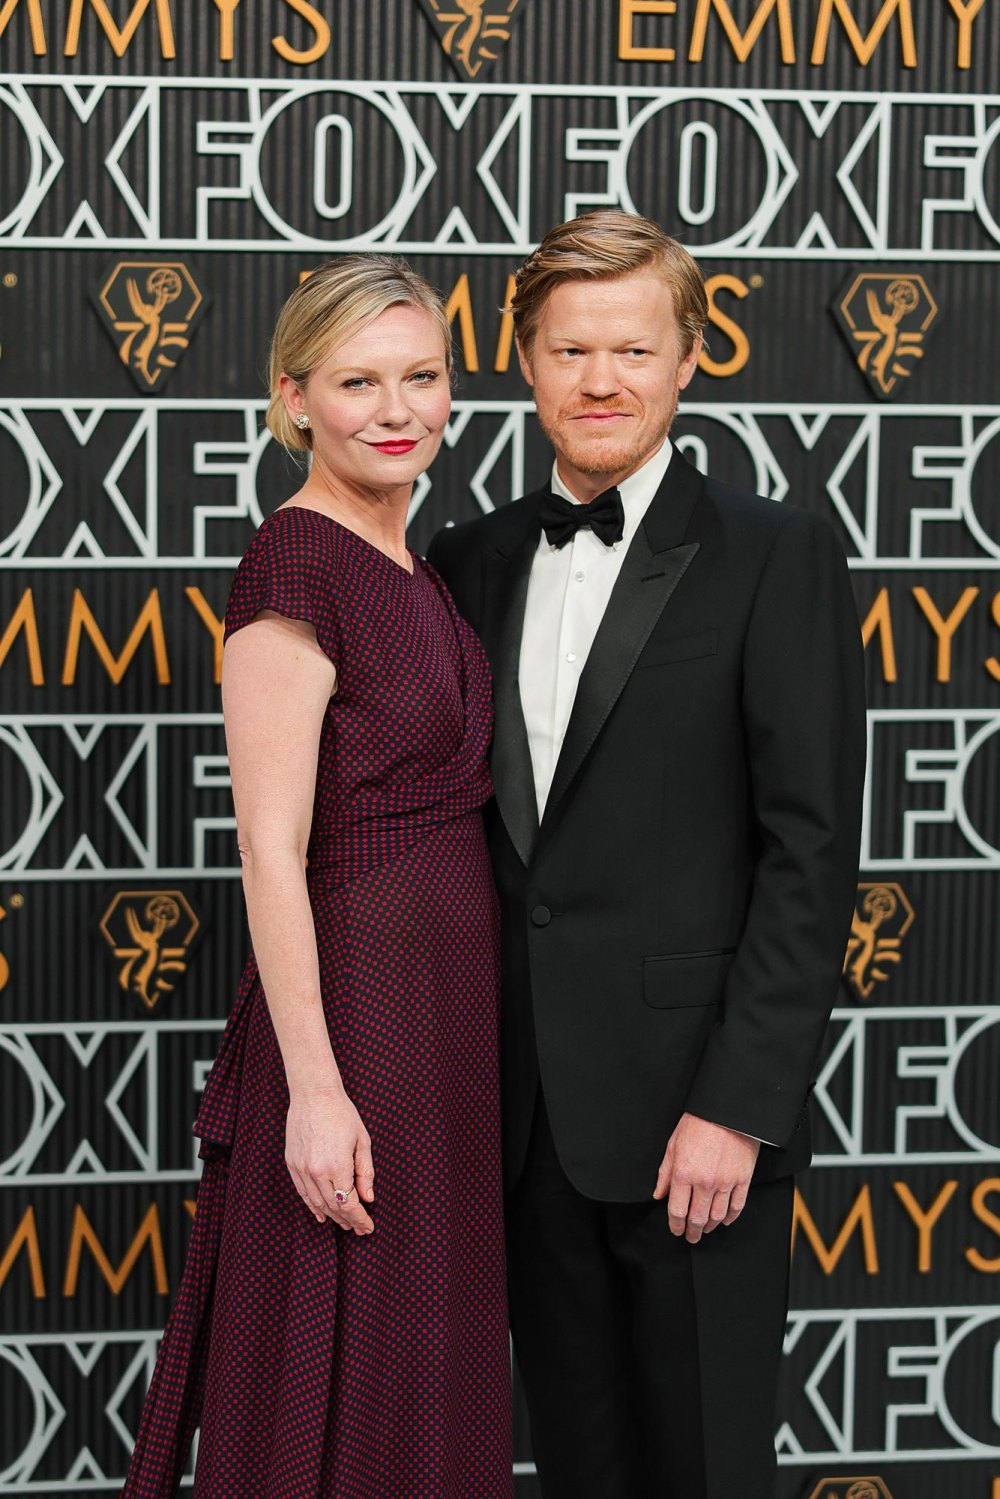 Jesse Plemons and Kirsten Dunst Bring the Heat to the 2023 Emmy Awards Red Carpet 646